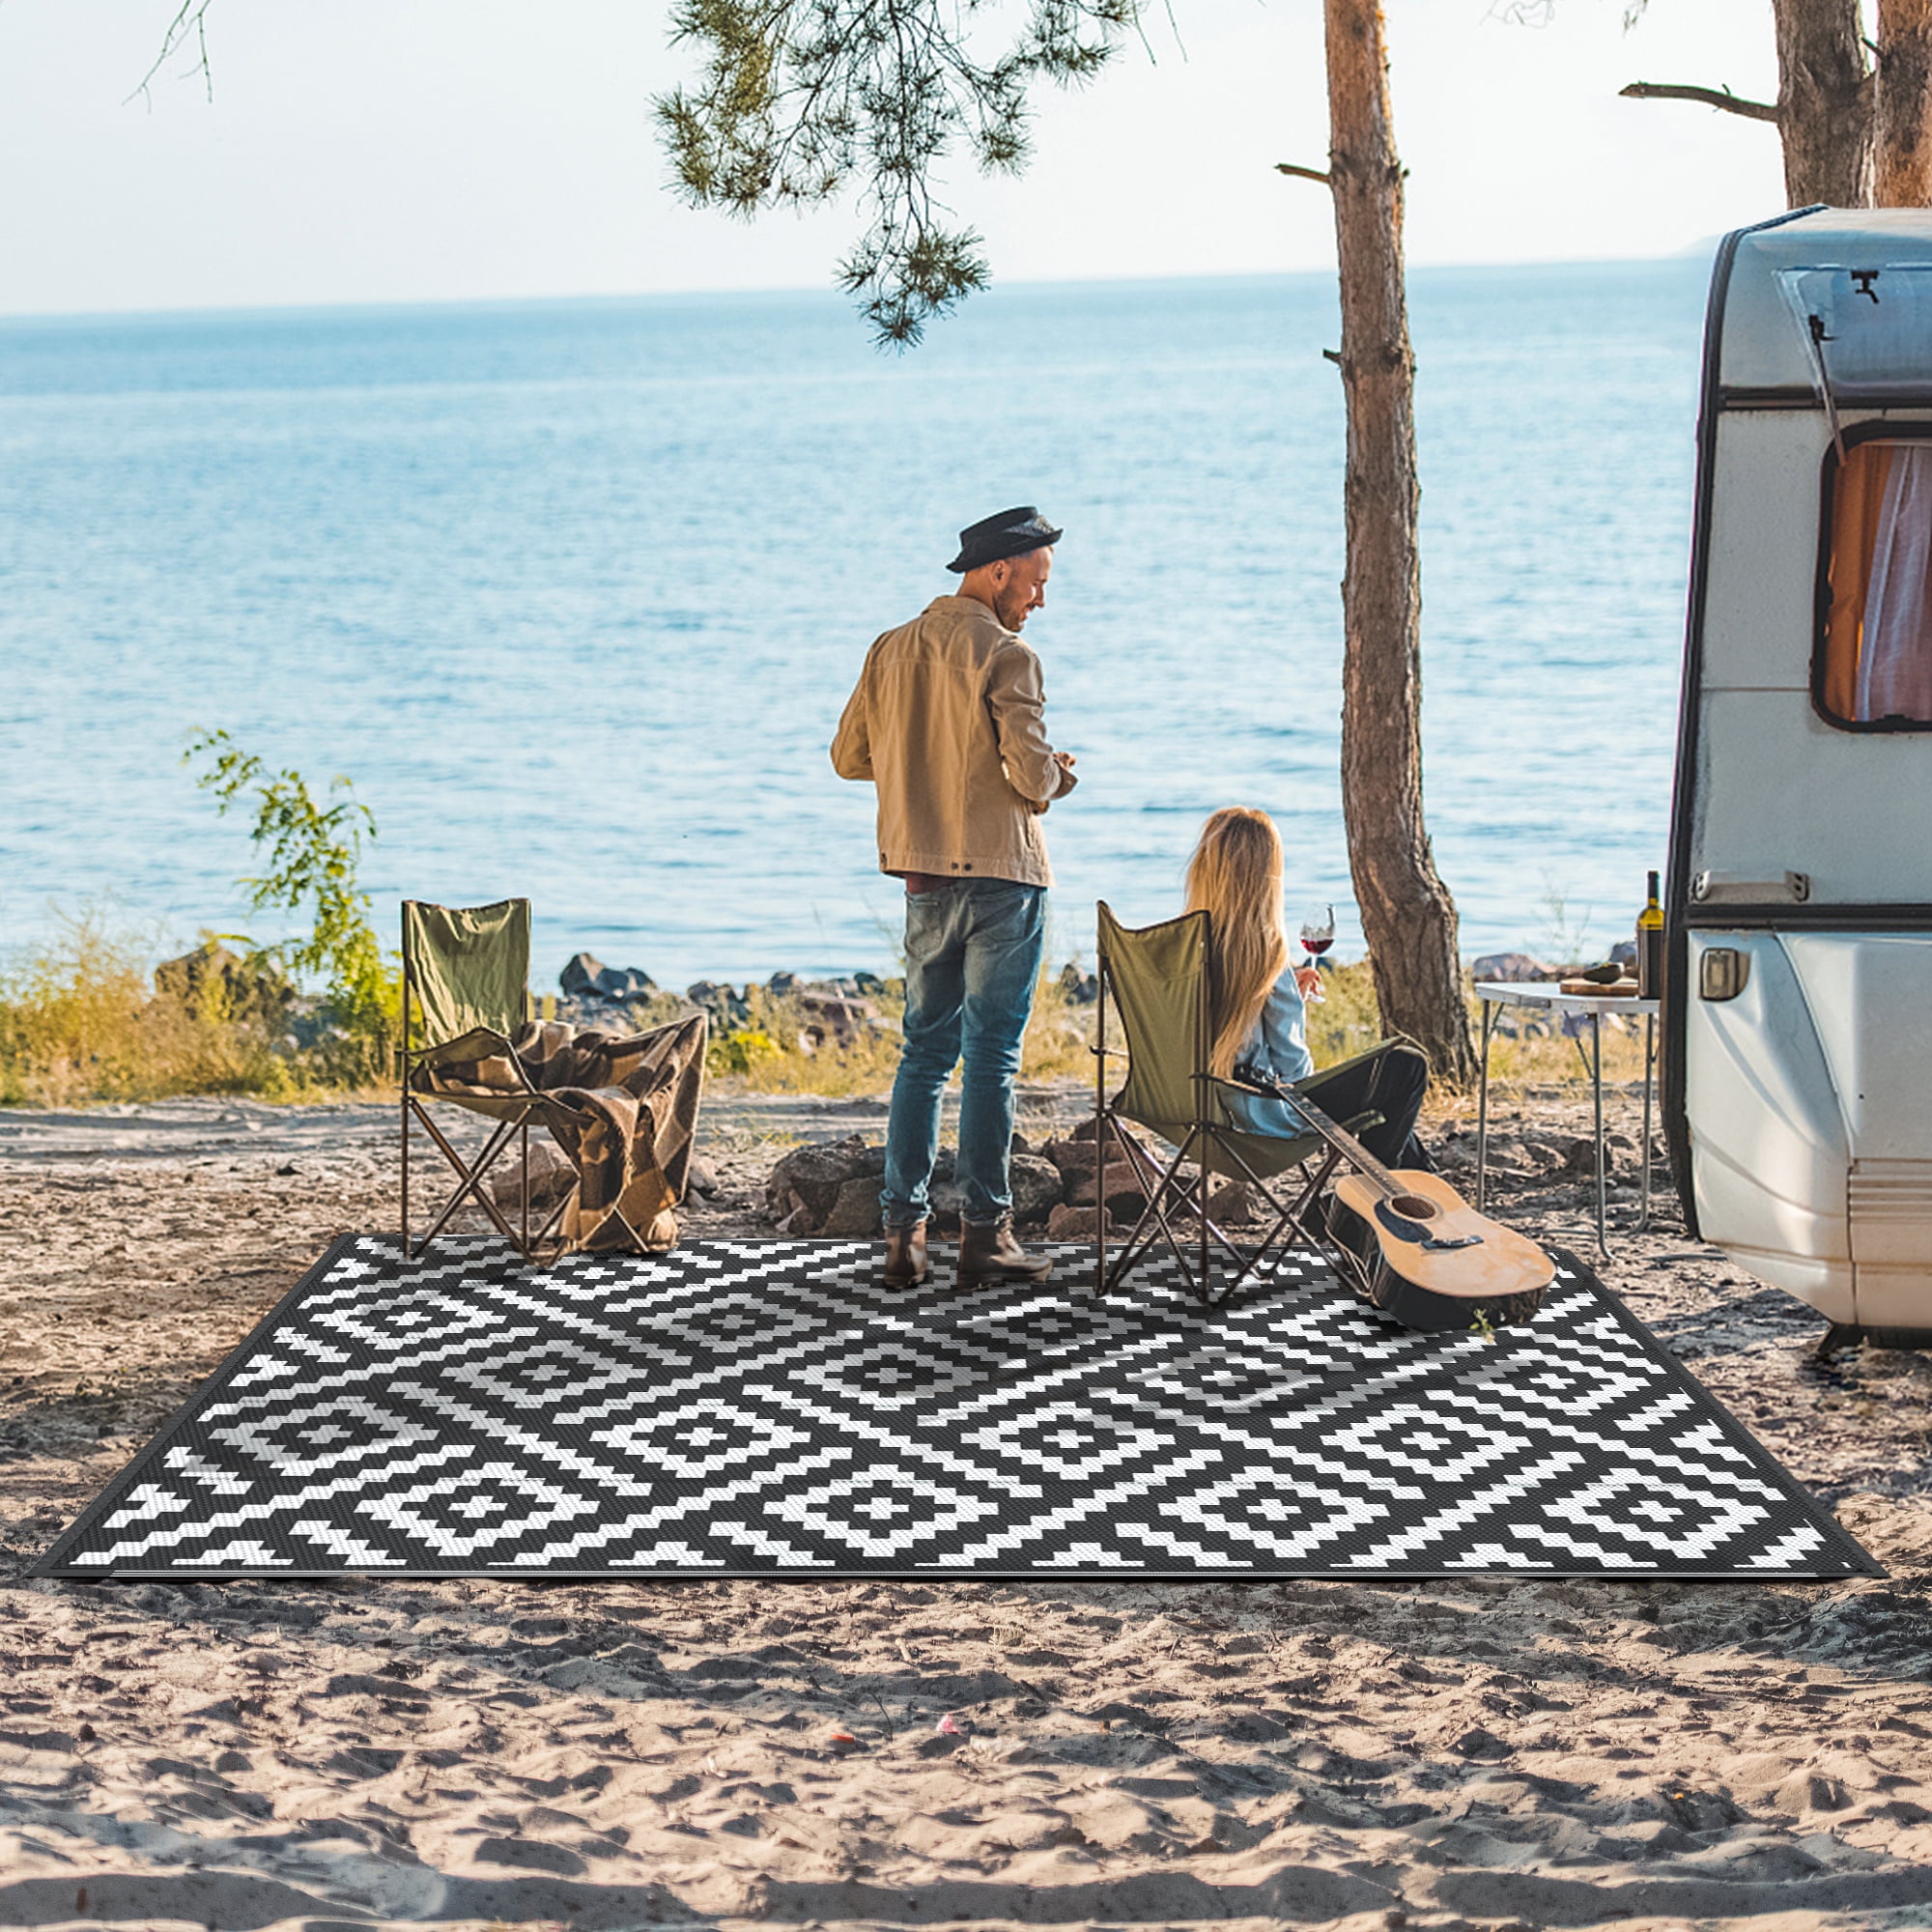 DEORAB 6'x9' Outdoor Rug for Patio Clearance,Reversible Straw Plastic  Waterproof Area Rugs,Clearance Mat,Rv,Camping,Black & Gray